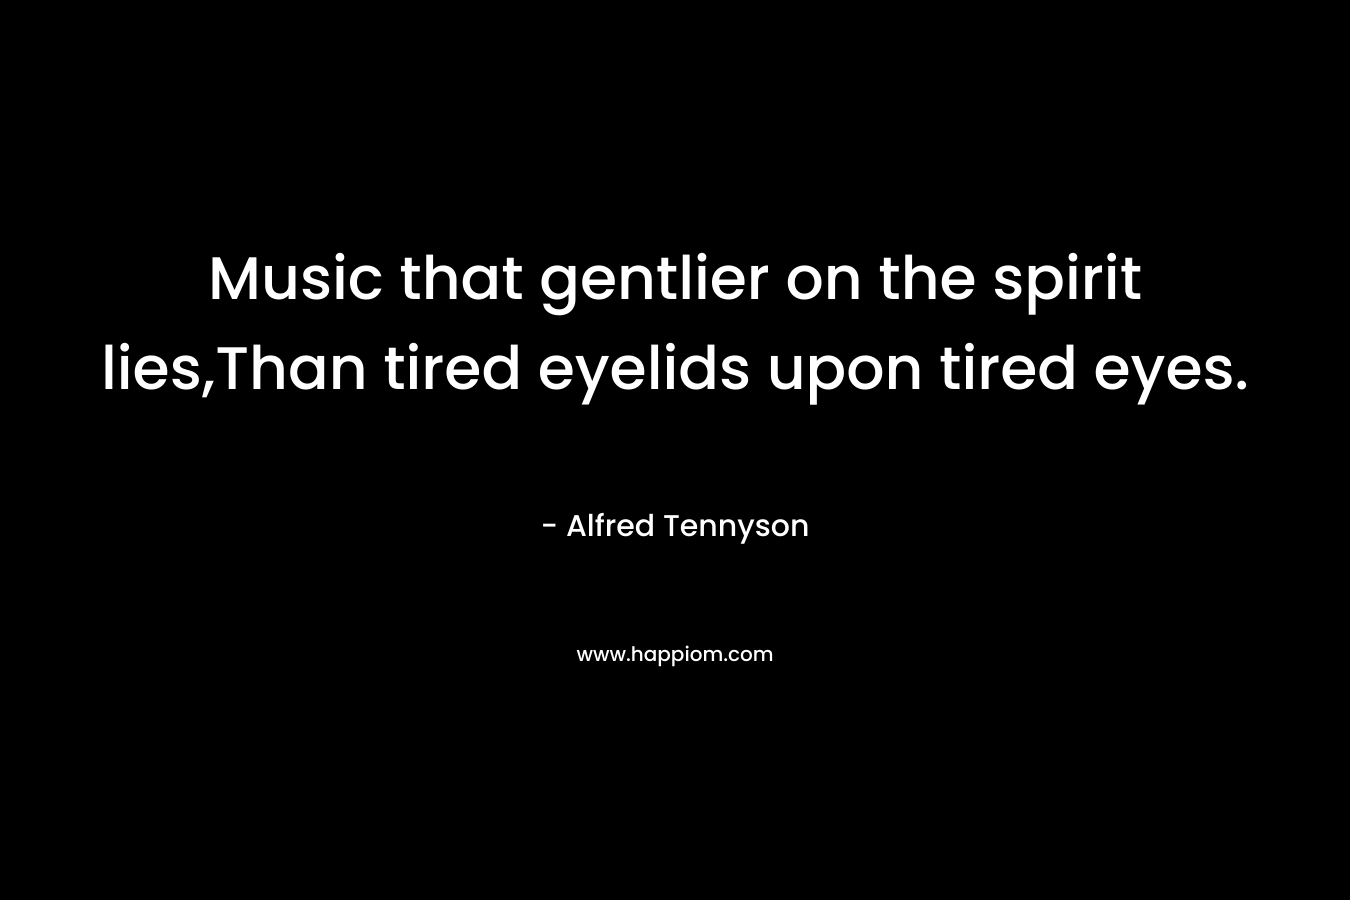 Music that gentlier on the spirit lies,Than tired eyelids upon tired eyes. – Alfred Tennyson